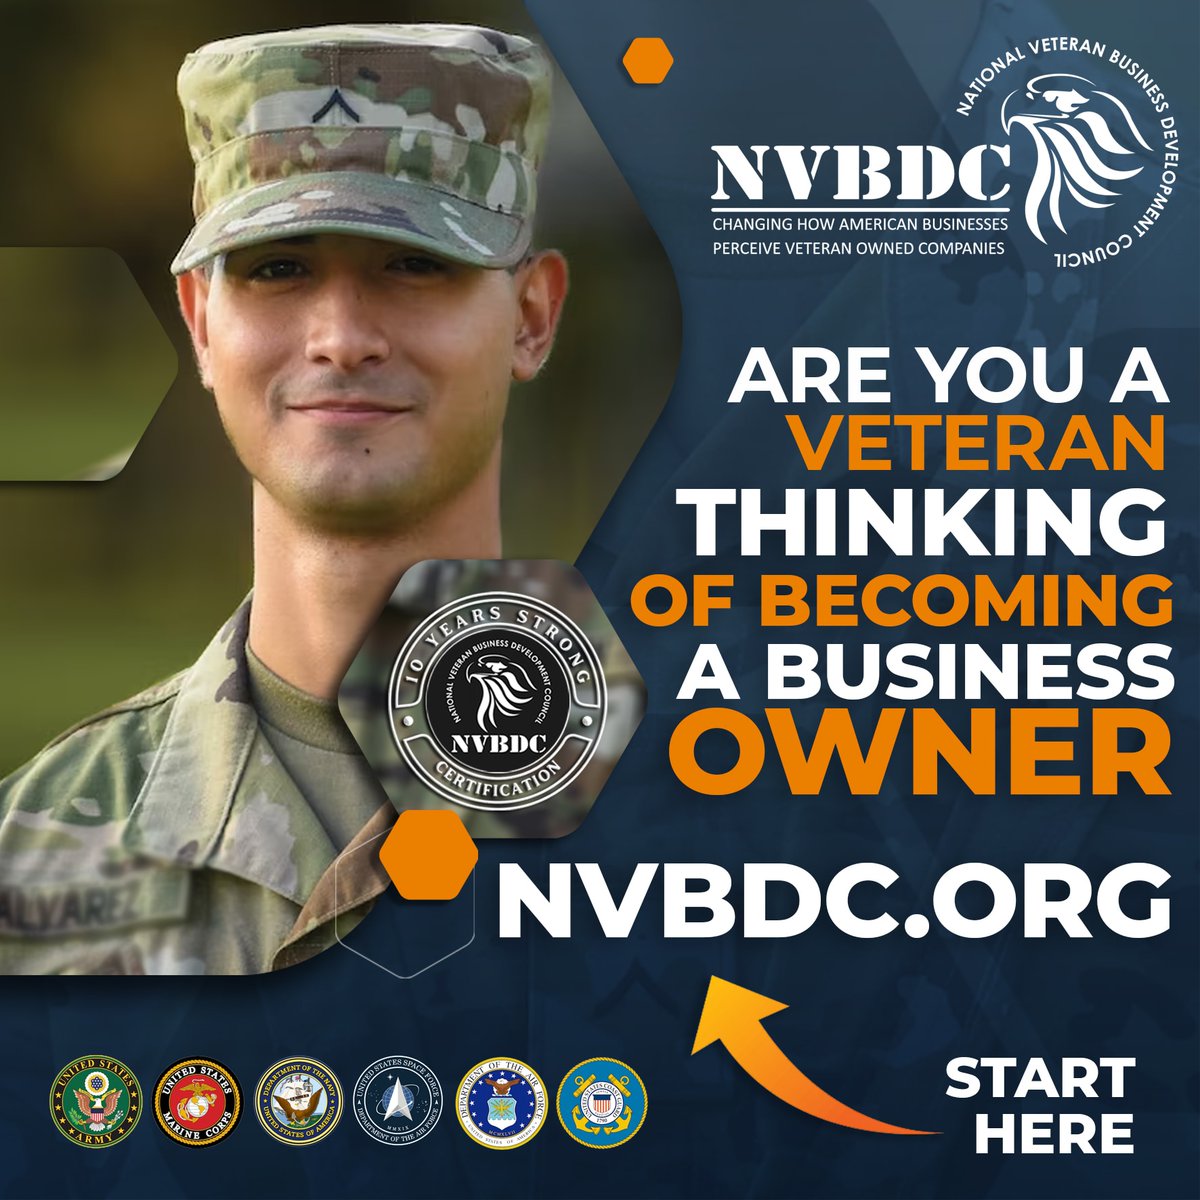 Get leverage over your competition. Set yourself apart from the pack by becoming certified by NVBDC. 

We are the original veteran business certification agency that gives your SD/VOB an opportunity to access a $122 Billion marketplace. 
 
Learn more: nvbdc.org